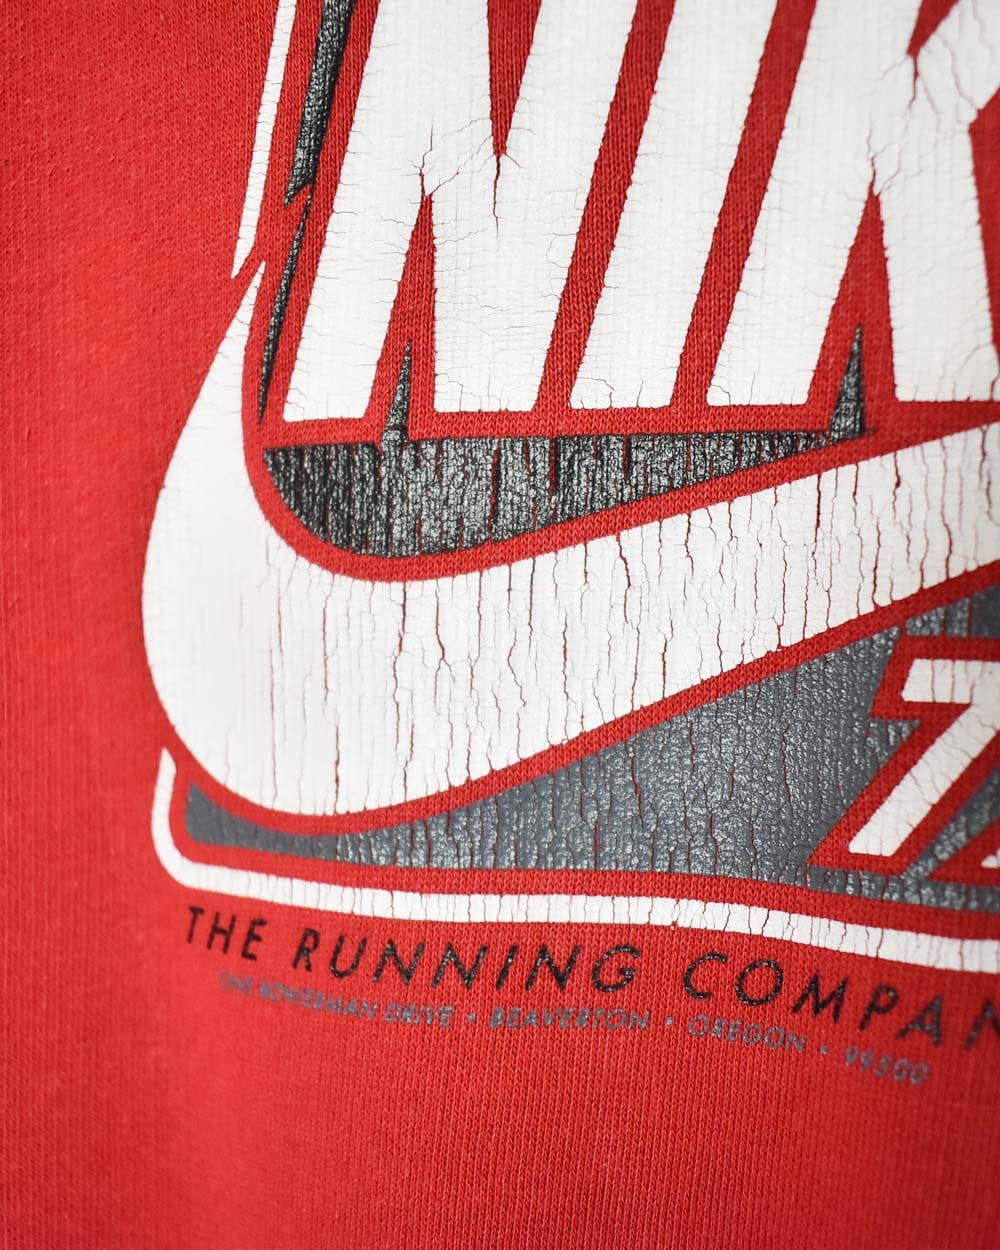 Red Nike 72 The Running Company Hoodie - X-Small